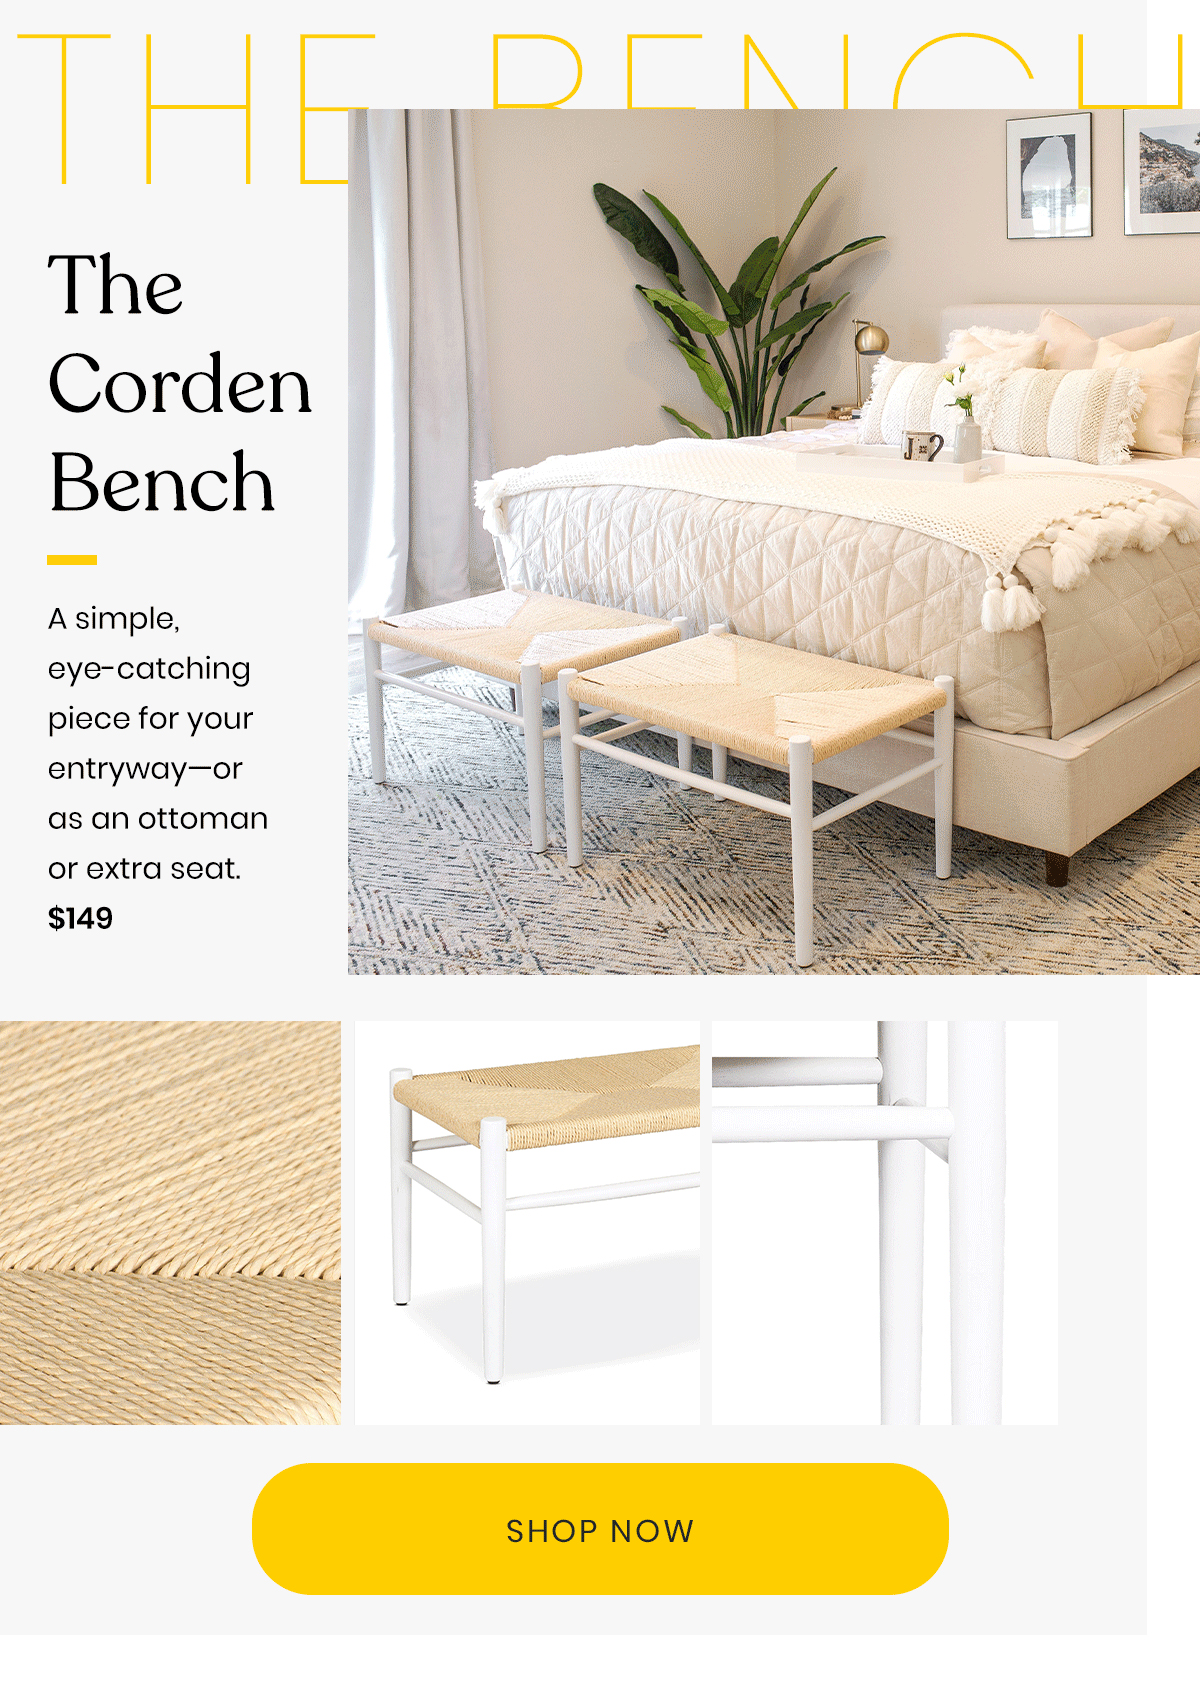 The Bench | The Corden Bench | A simple, eye-catching piece for your entryway - or as an ottoman or extra seat. | $149 | Shop Now 